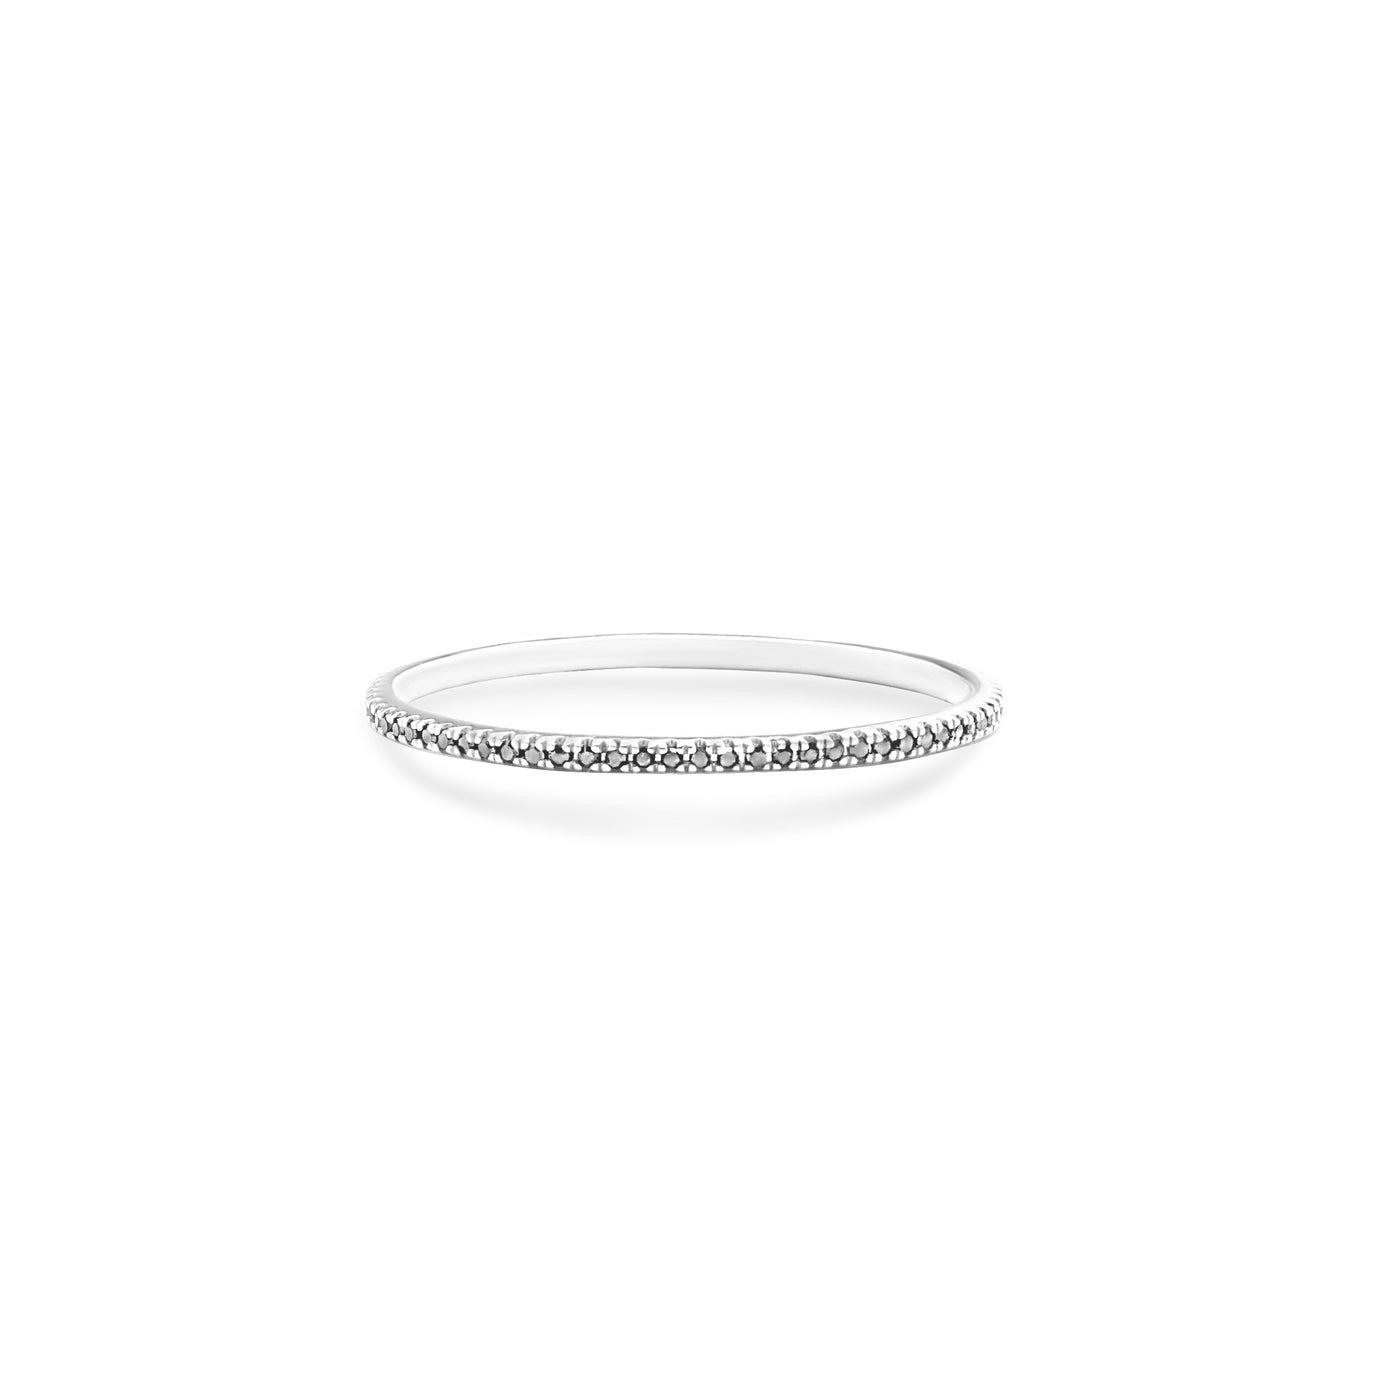 14 Karat White Gold Ring with Black Diamonds in One Row Laying Flat On Flat White Table